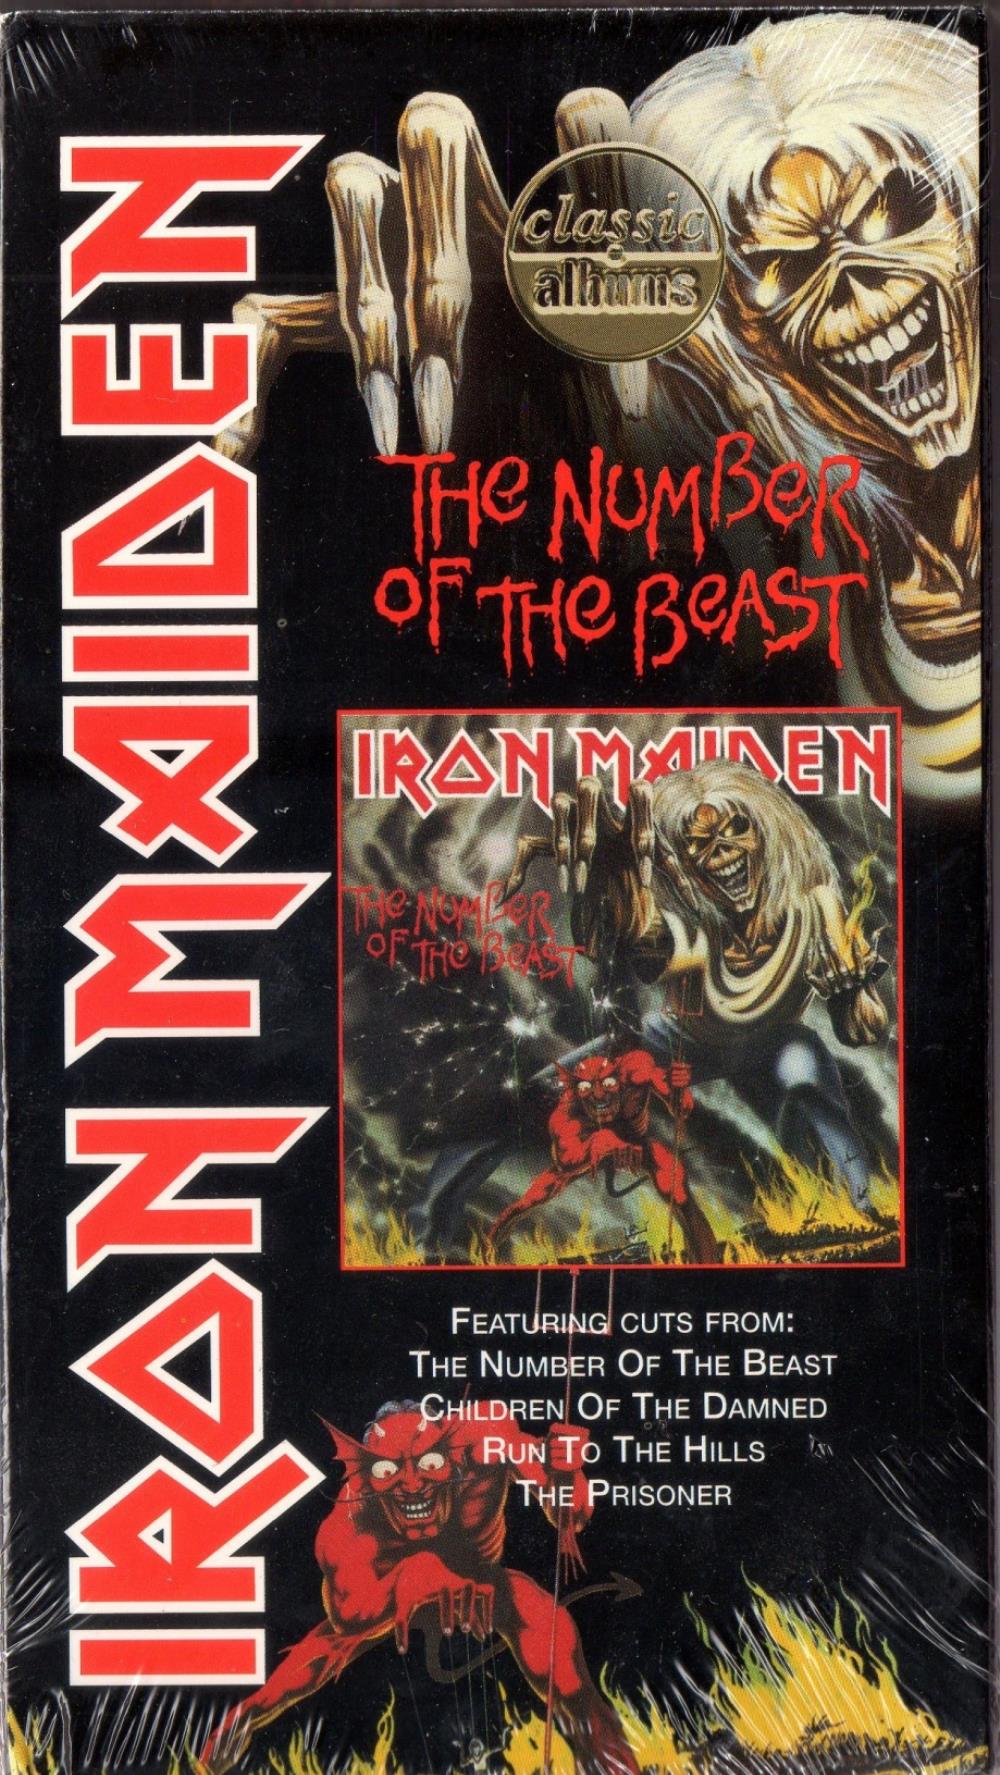 Iron Maiden - Classic Albums: The Number of the Beast CD (album) cover